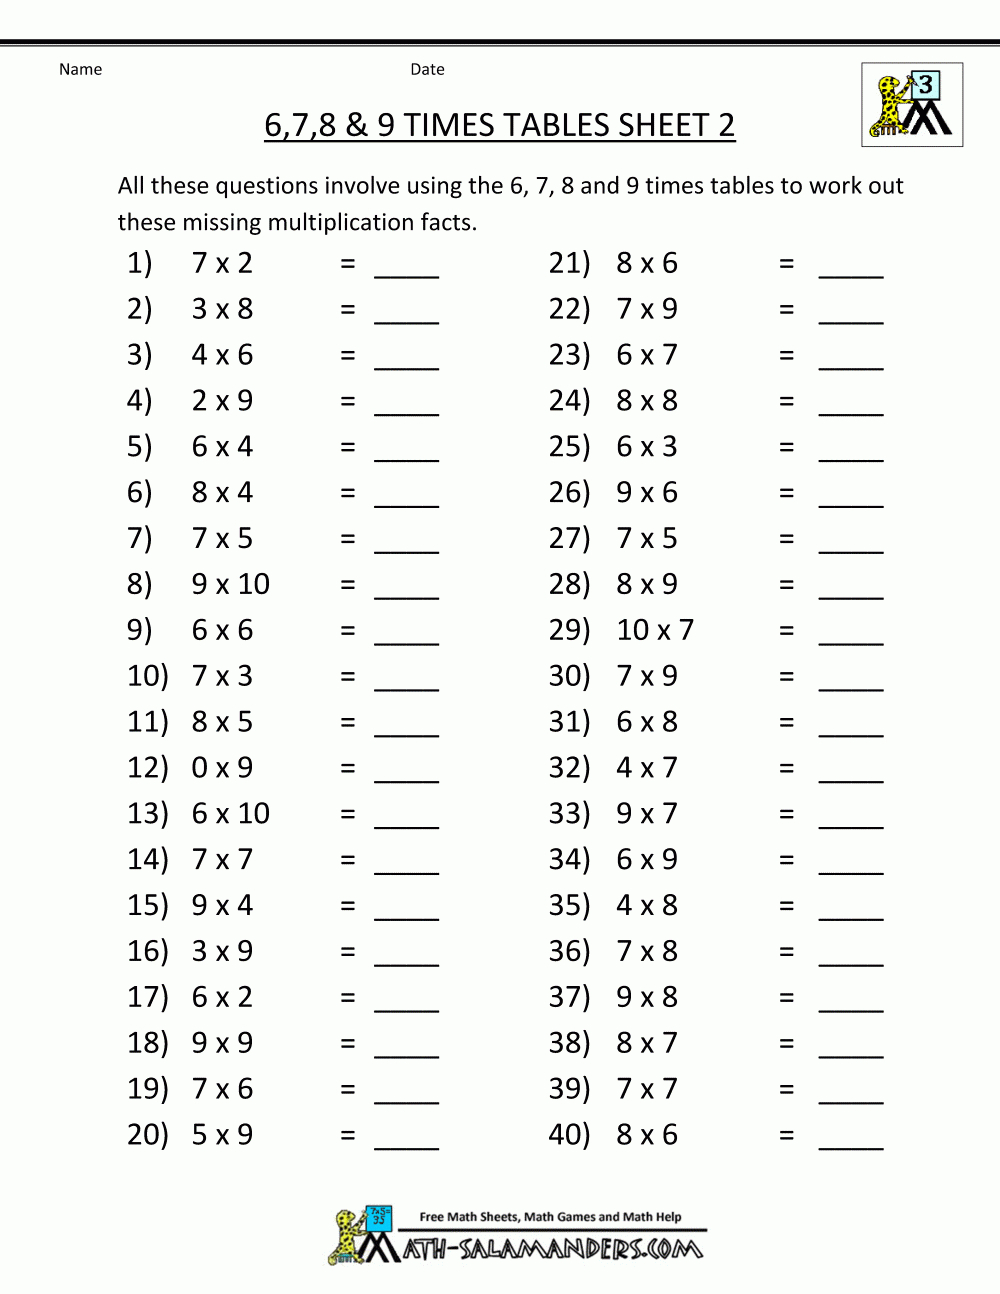 Free Math Sheets Multiplication 6 7 8 9 Times Tables 2 throughout Printable Multiplication Tables Exercises